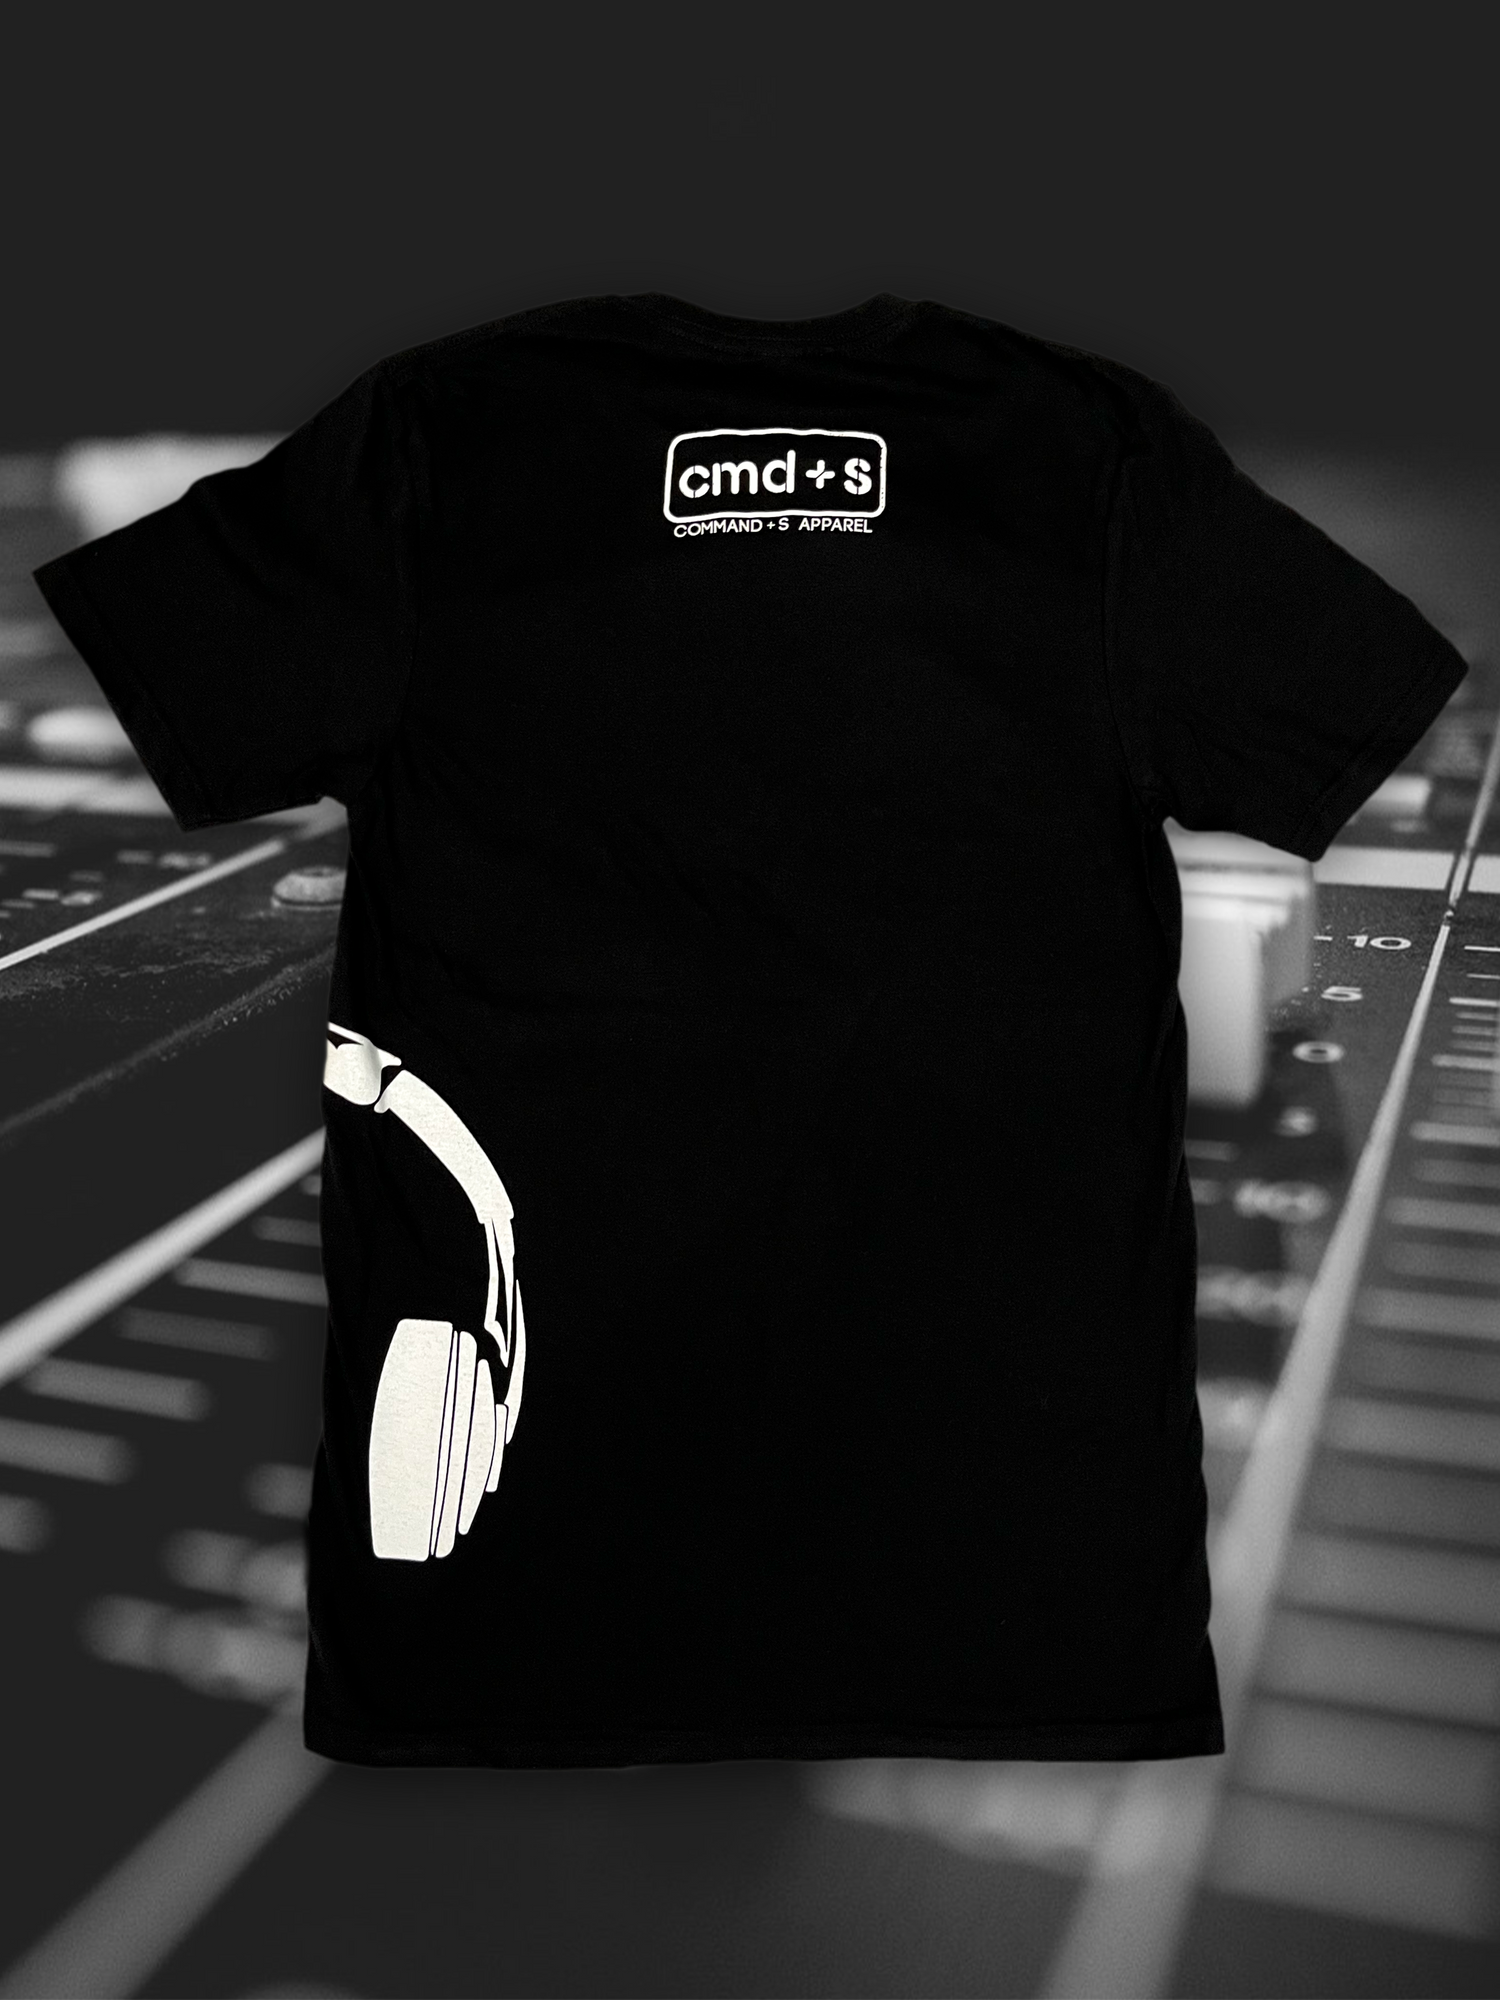 How to Upload Audio, Music, Decals, Pants, Shirts, and T-Shirts